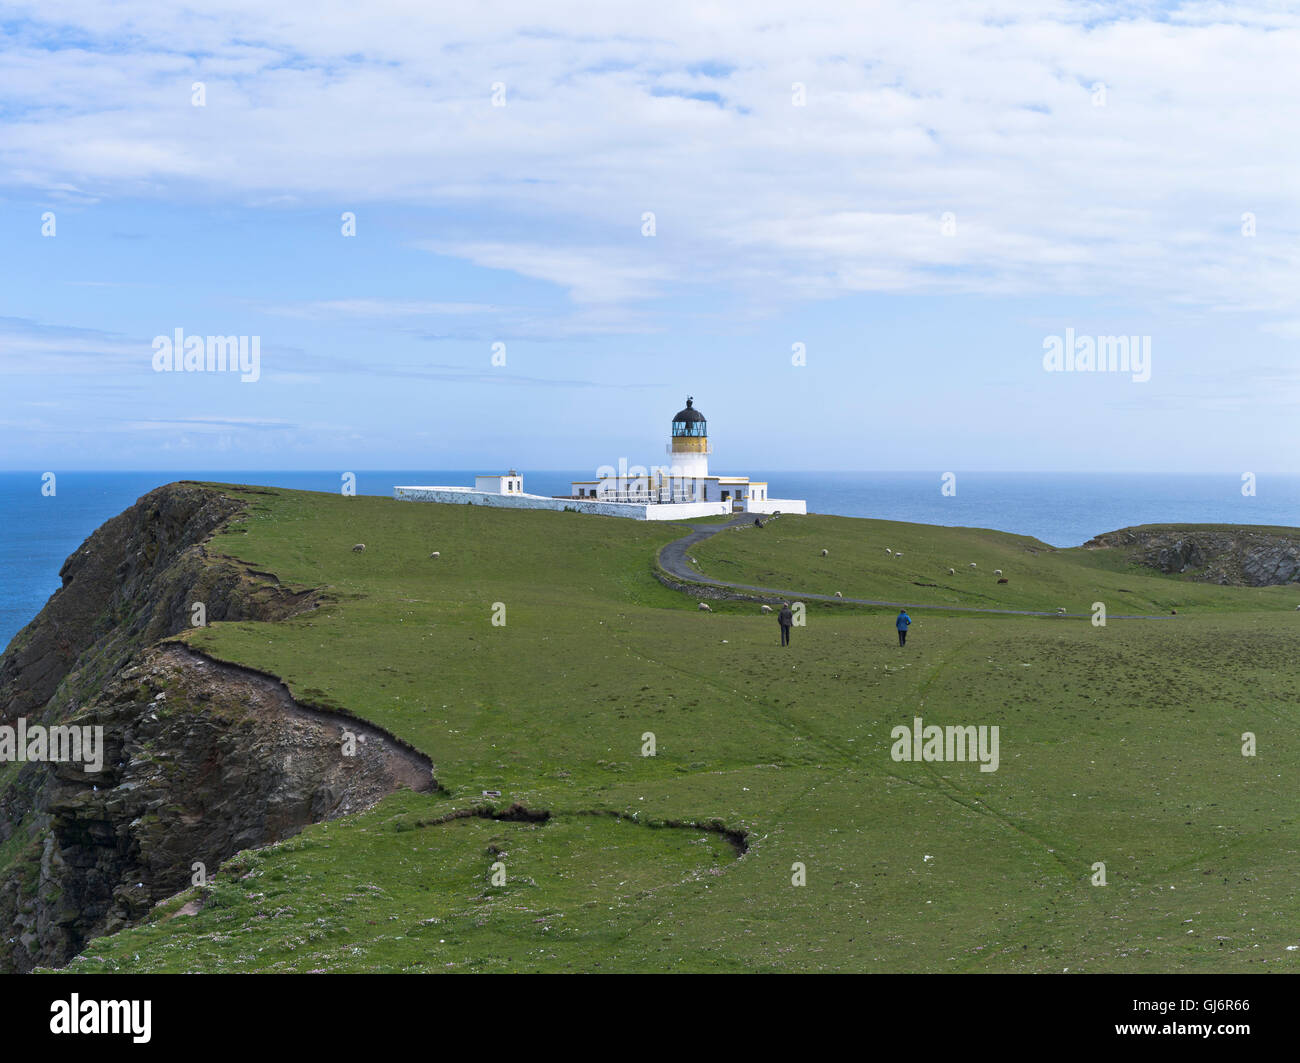 dh North Lighthouse FAIR ISLE SHETLAND Hiker couple walking cliff tops to lighthouse isles scotland people hikers Stock Photo